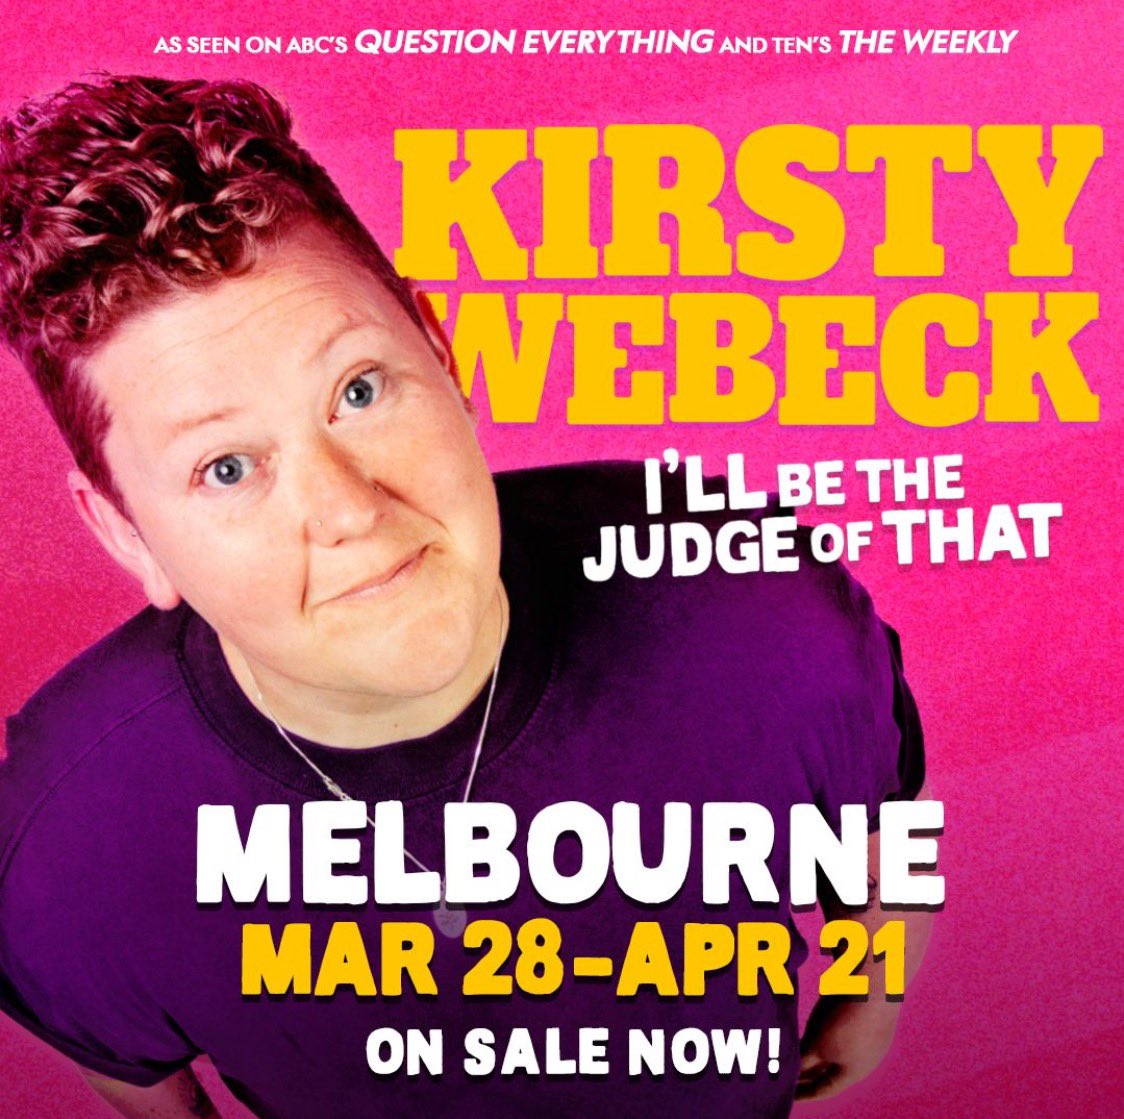 Hello Sydney! You’re next. Coming at you next week with I’ll Be The Judge Of That. Why don’t you…I dunno…come? aucentury.sales.ticketsearch.com/sales/saleseve…